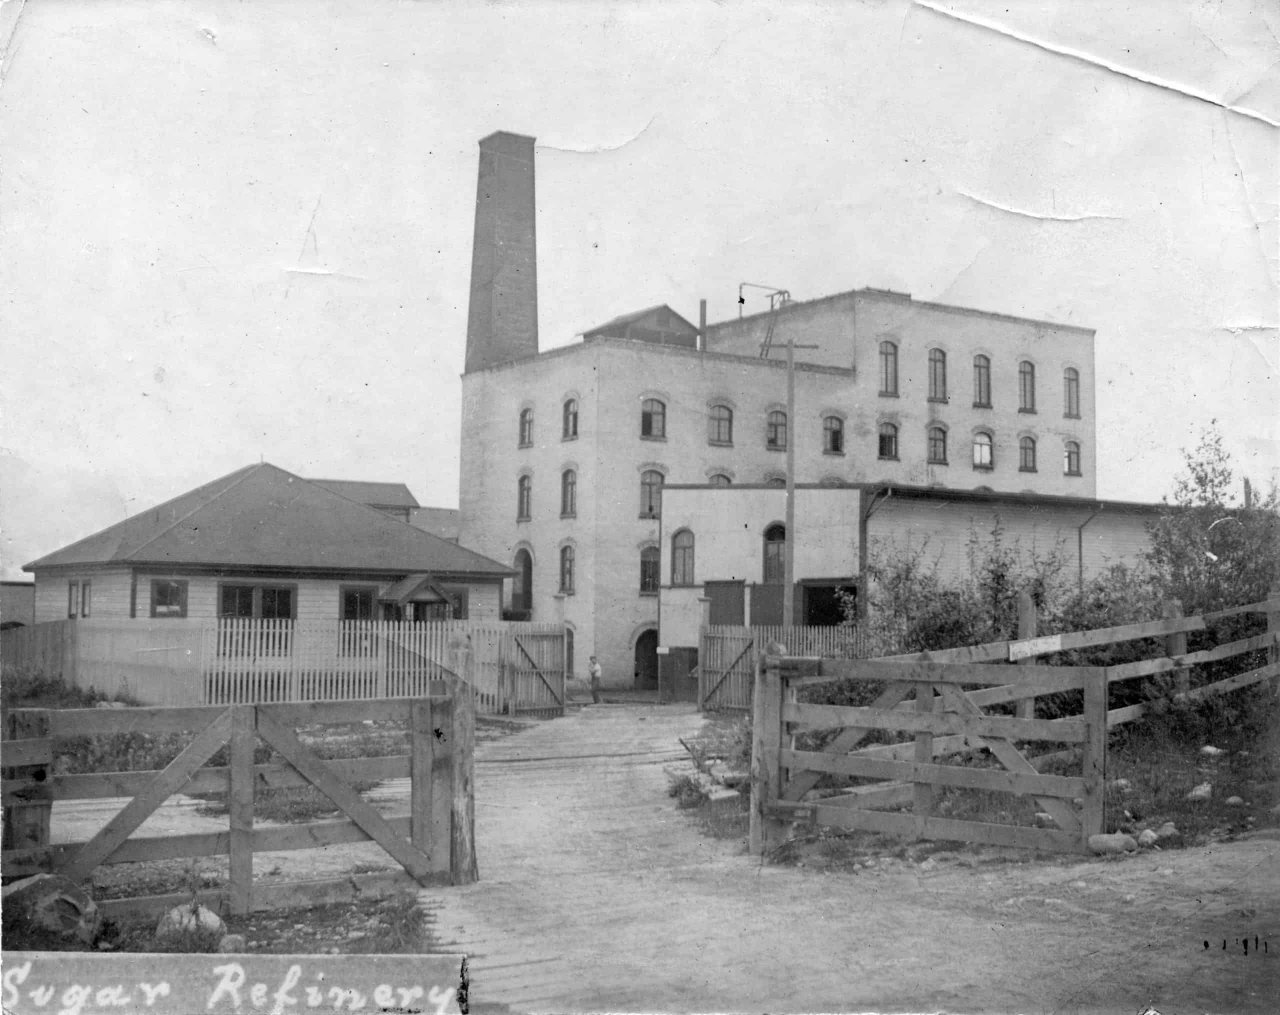 Original buildings of the B.C. Sugar refinery in 1892. City of Vancouver Archives, Bu P216. 